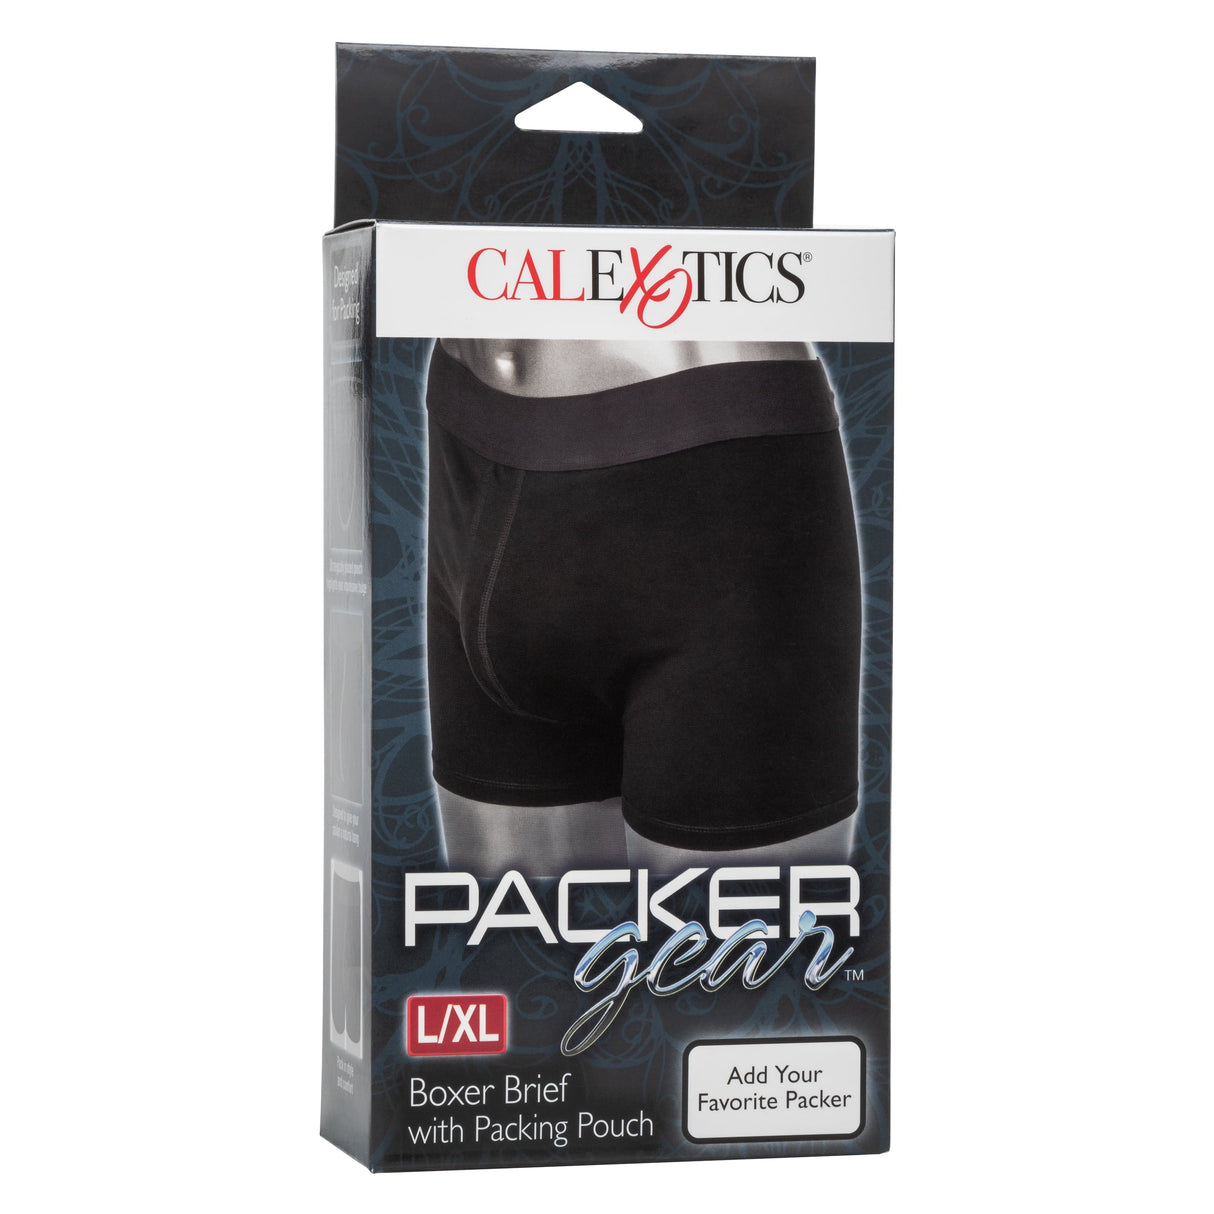 California Exotics - Packer Gear Boxer Brief Strap On Harness with Packing Pouch L/XL (Black) CE1925 CherryAffairs